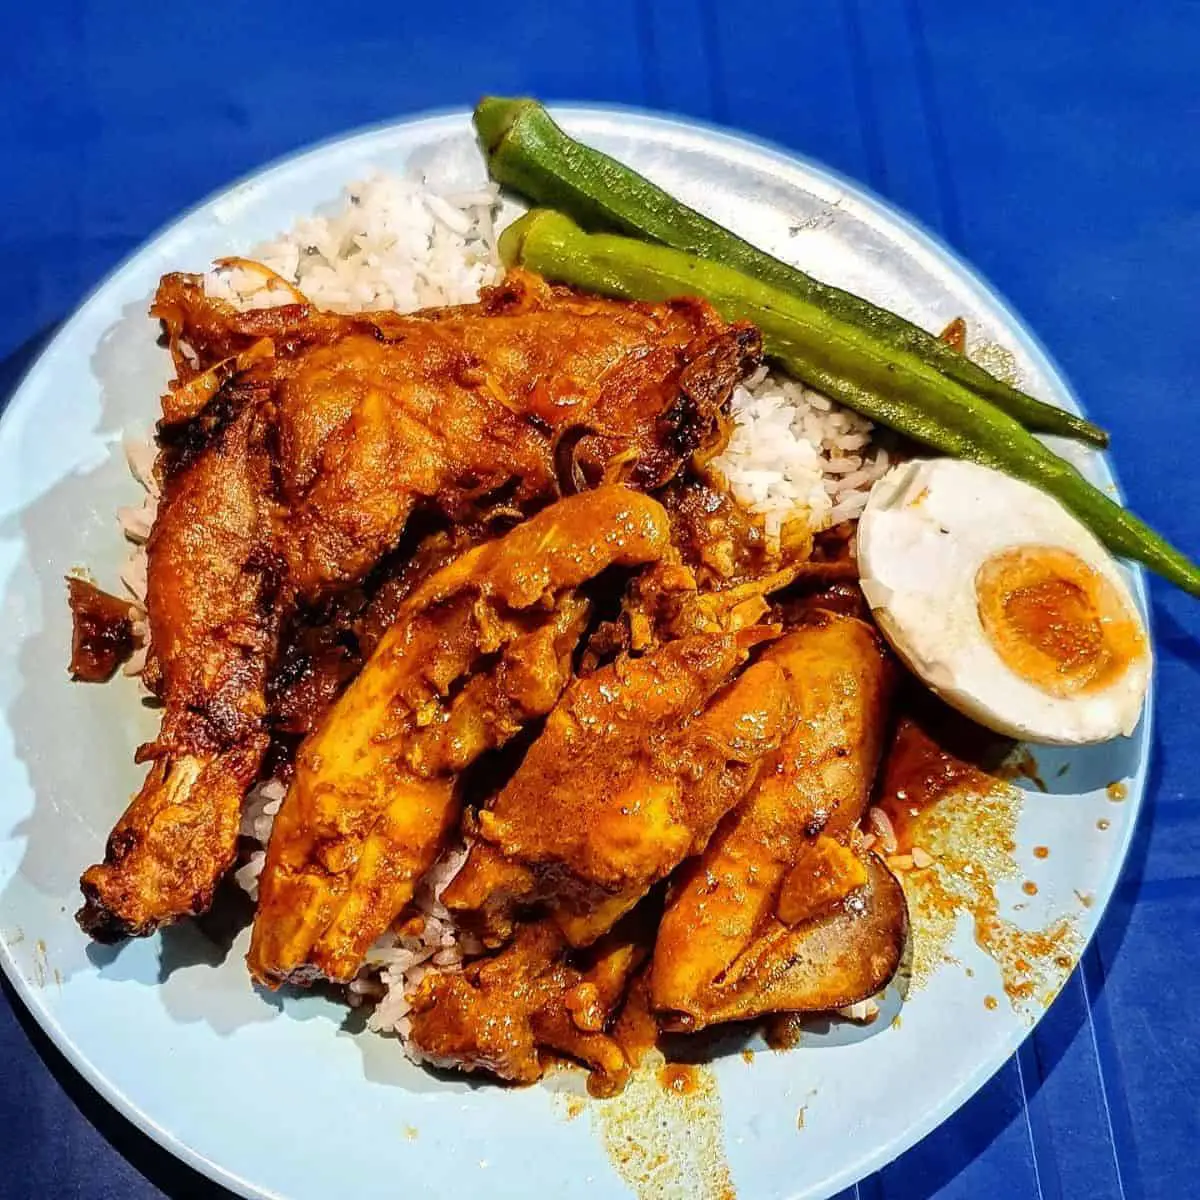 Beratur Original’s generous serving of chicken on top of a curry rice placed in a blue table